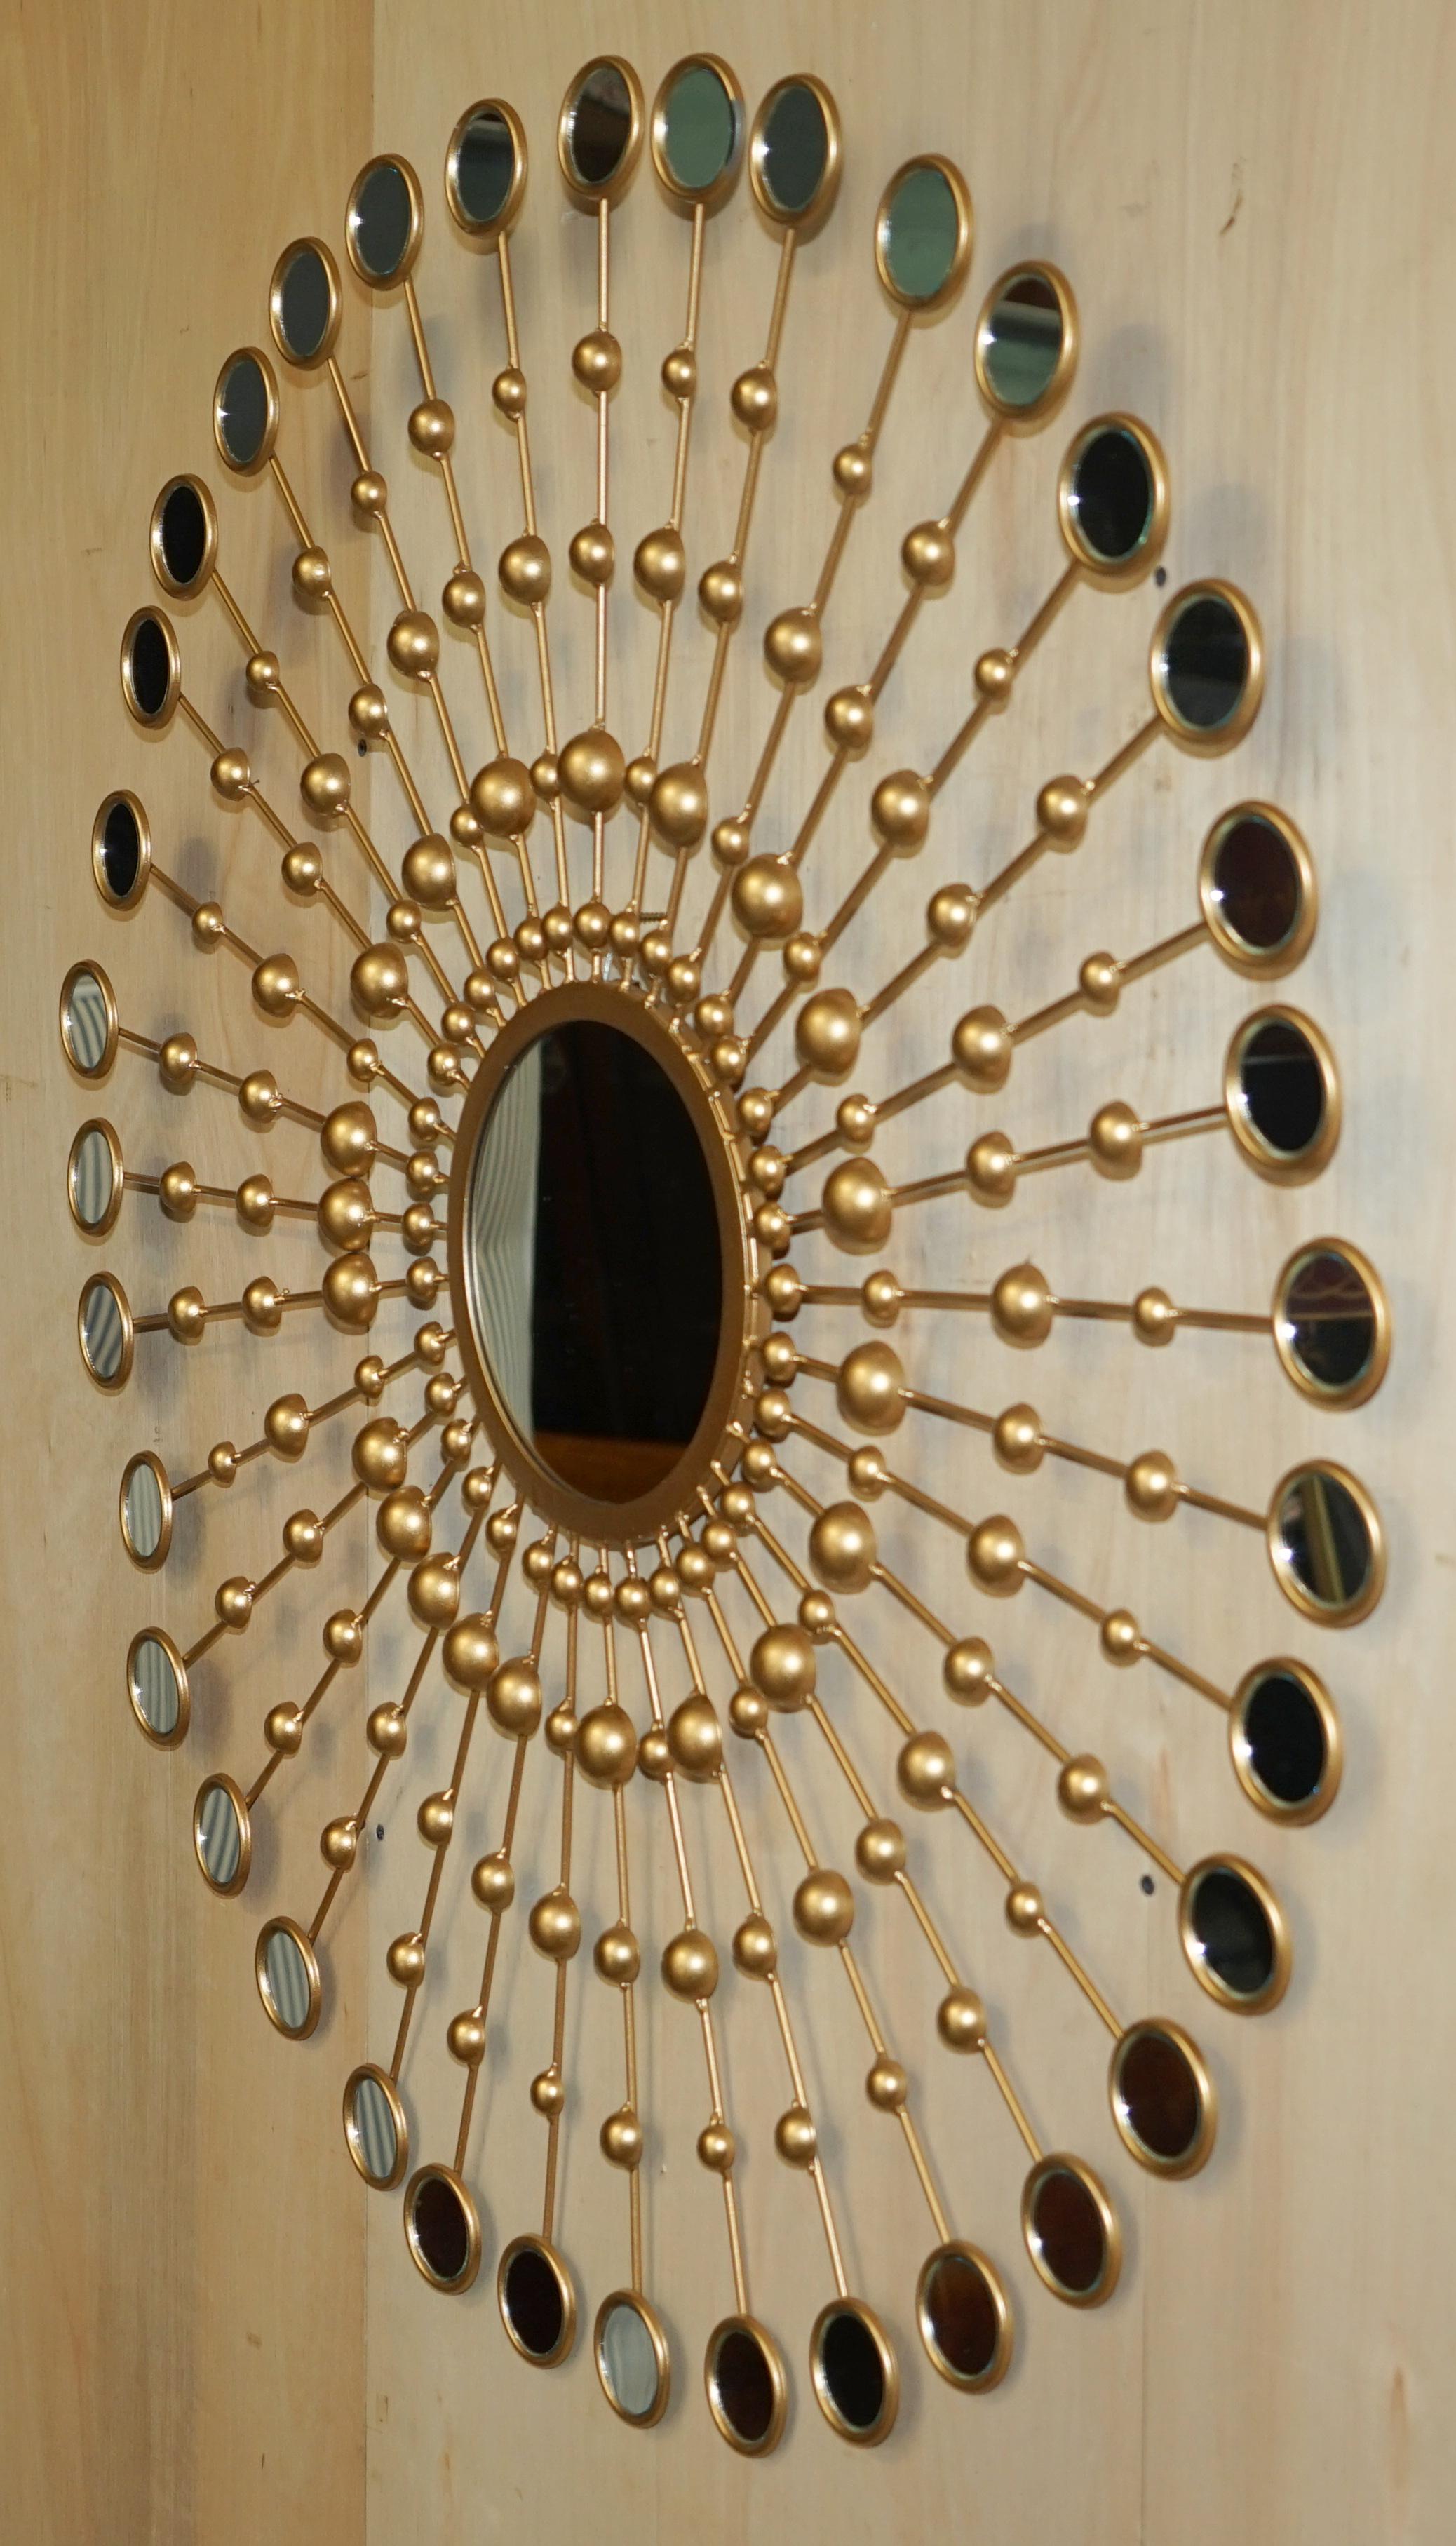 LOVELY LOOKiNG DECORATIVE LARGE WALL MIRROR MIT 36 SMALL MIRRORS IN einer SUN FORM im Angebot 11